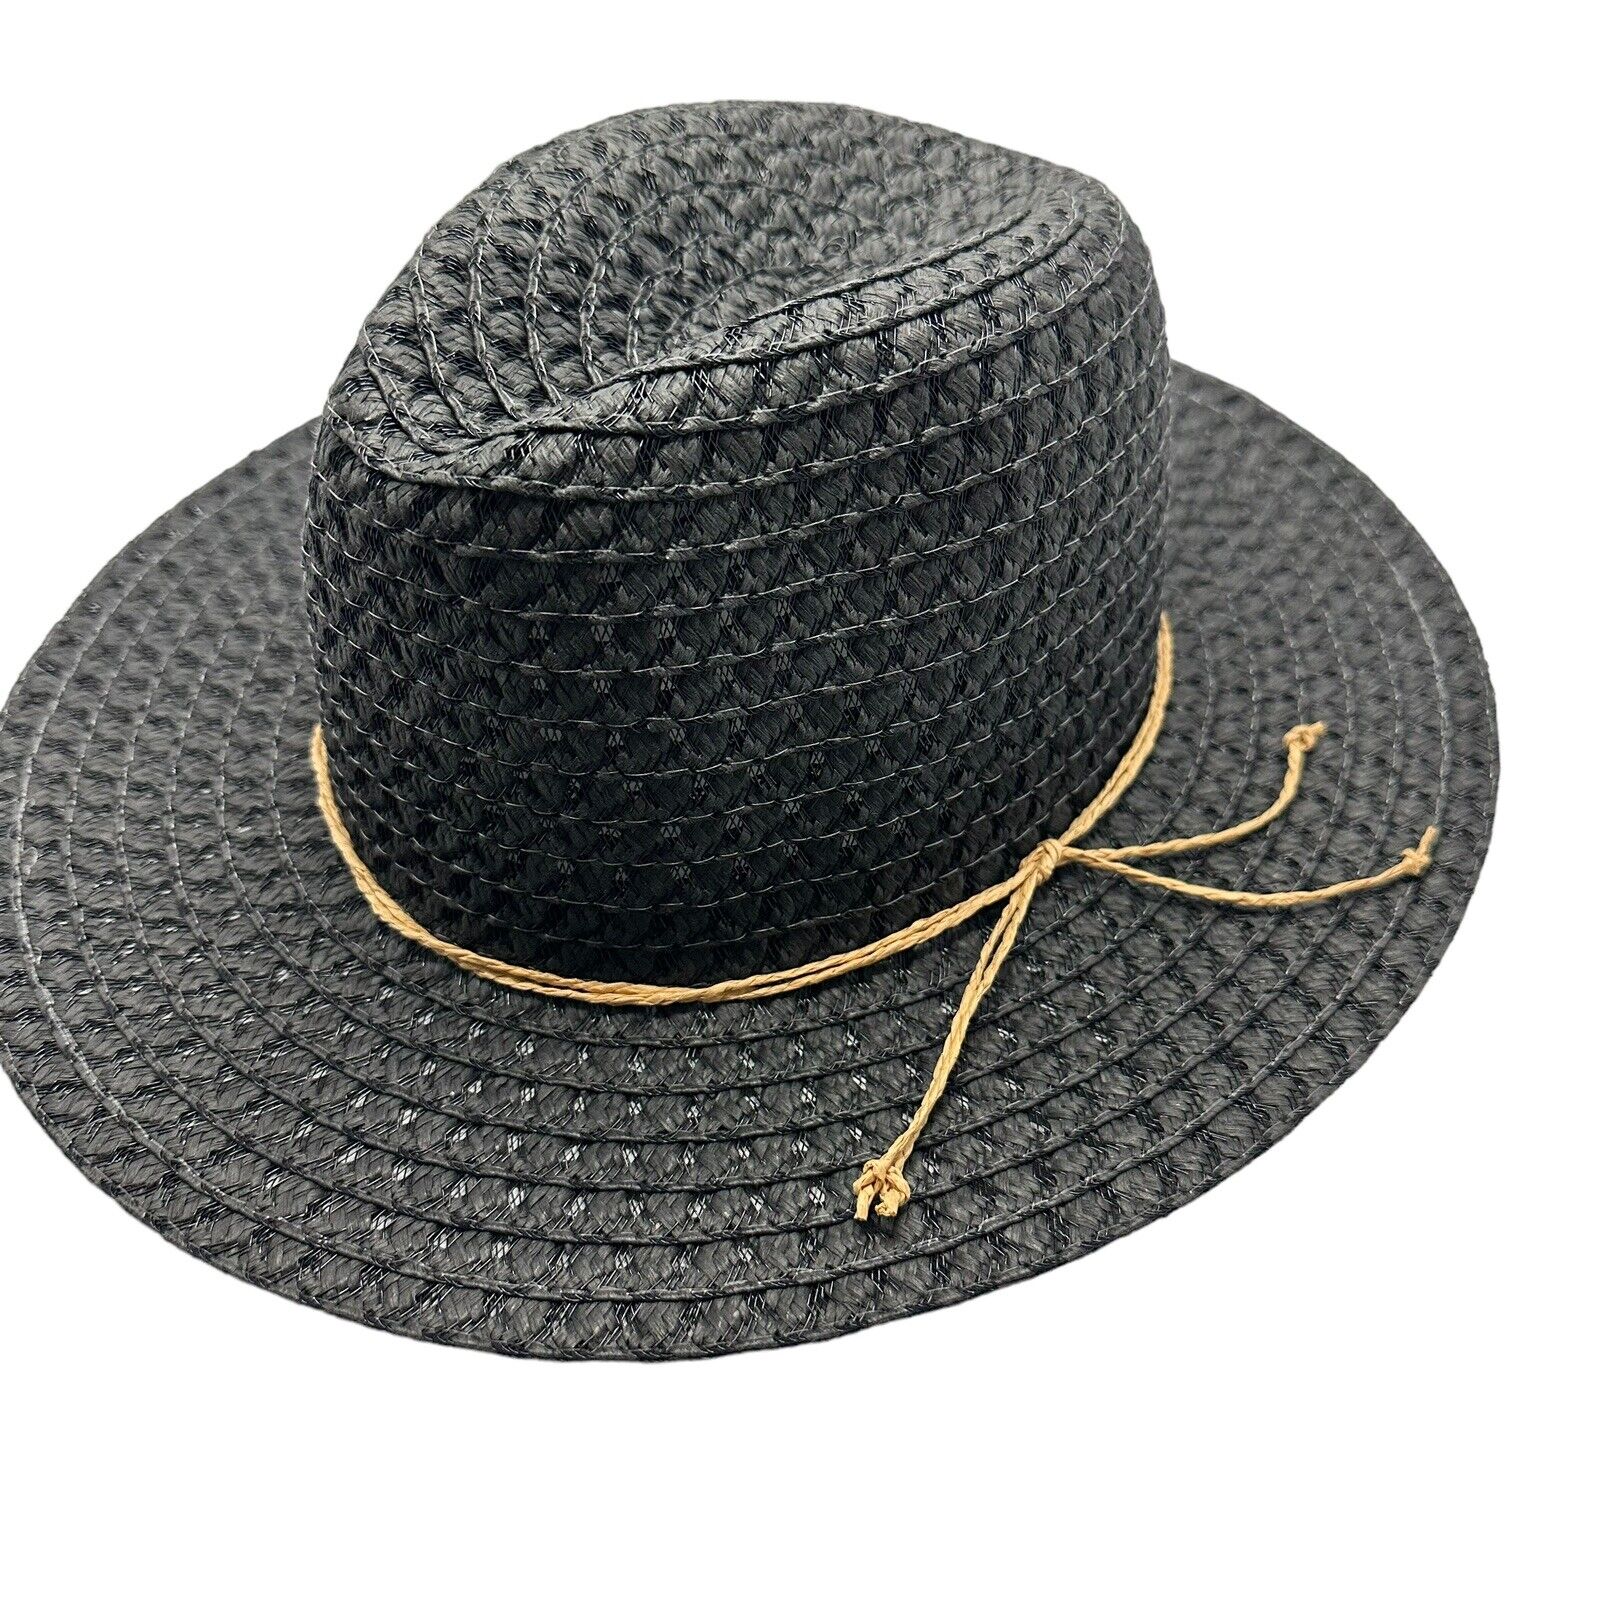 Chatties Black Sunhat One Size